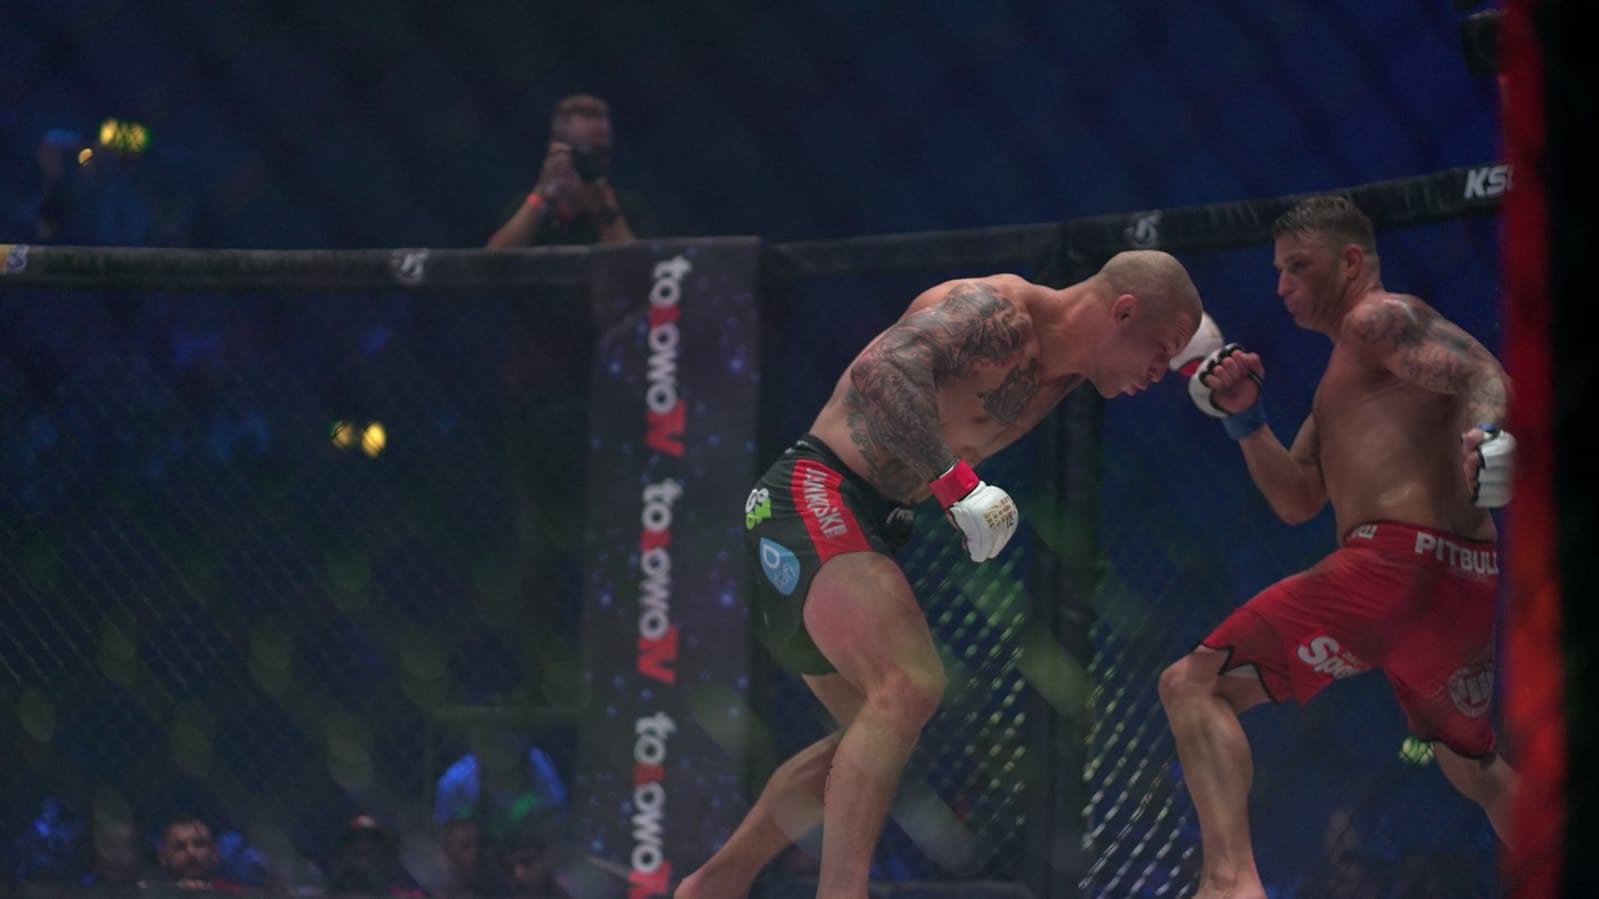 Damian Janikowski defeats Tony GIles by verbal submission at KSW 50 in London